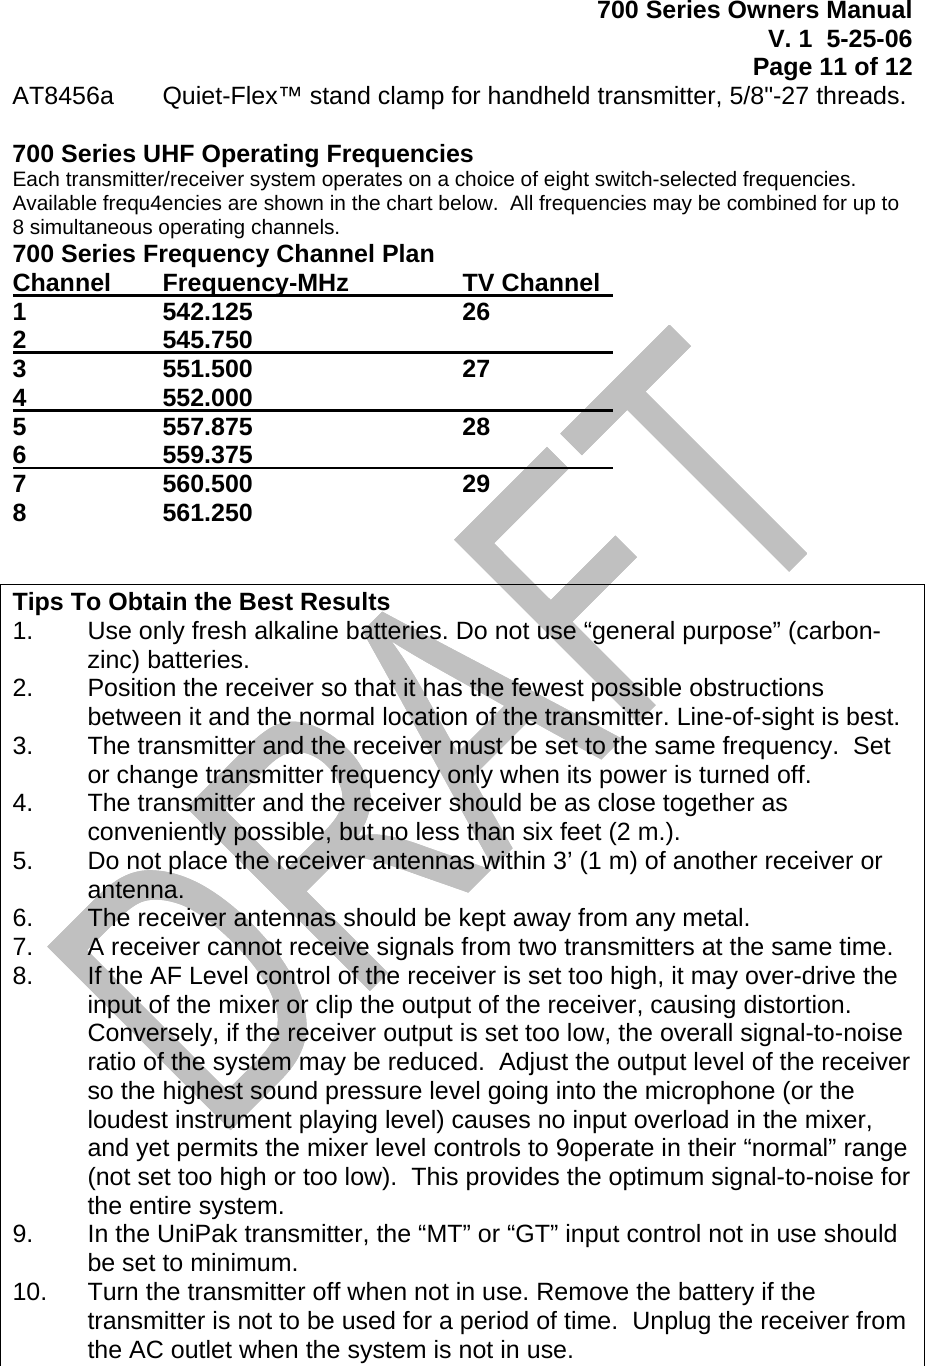 700 Series Owners Manual V. 1  5-25-06 Page 11 of 12  AT8456a   Quiet-Flex™ stand clamp for handheld transmitter, 5/8&quot;-27 threads.  700 Series UHF Operating Frequencies Each transmitter/receiver system operates on a choice of eight switch-selected frequencies.  Available frequ4encies are shown in the chart below.  All frequencies may be combined for up to 8 simultaneous operating channels. 700 Series Frequency Channel Plan Channel    Frequency-MHz    TV Channel   1  542.125   26 2  545.750      3  551.500   27 4  552.000       5  557.875   28 6  559.375       7  560.500   29 8  561.250       Tips To Obtain the Best Results 1.   Use only fresh alkaline batteries. Do not use “general purpose” (carbon-zinc) batteries. 2.   Position the receiver so that it has the fewest possible obstructions between it and the normal location of the transmitter. Line-of-sight is best. 3.   The transmitter and the receiver must be set to the same frequency.  Set or change transmitter frequency only when its power is turned off. 4.   The transmitter and the receiver should be as close together as conveniently possible, but no less than six feet (2 m.). 5.   Do not place the receiver antennas within 3’ (1 m) of another receiver or antenna. 6.   The receiver antennas should be kept away from any metal.   7.   A receiver cannot receive signals from two transmitters at the same time. 8.   If the AF Level control of the receiver is set too high, it may over-drive the input of the mixer or clip the output of the receiver, causing distortion. Conversely, if the receiver output is set too low, the overall signal-to-noise ratio of the system may be reduced.  Adjust the output level of the receiver so the highest sound pressure level going into the microphone (or the loudest instrument playing level) causes no input overload in the mixer, and yet permits the mixer level controls to 9operate in their “normal” range (not set too high or too low).  This provides the optimum signal-to-noise for the entire system. 9.   In the UniPak transmitter, the “MT” or “GT” input control not in use should be set to minimum. 10.   Turn the transmitter off when not in use. Remove the battery if the transmitter is not to be used for a period of time.  Unplug the receiver from the AC outlet when the system is not in use.  